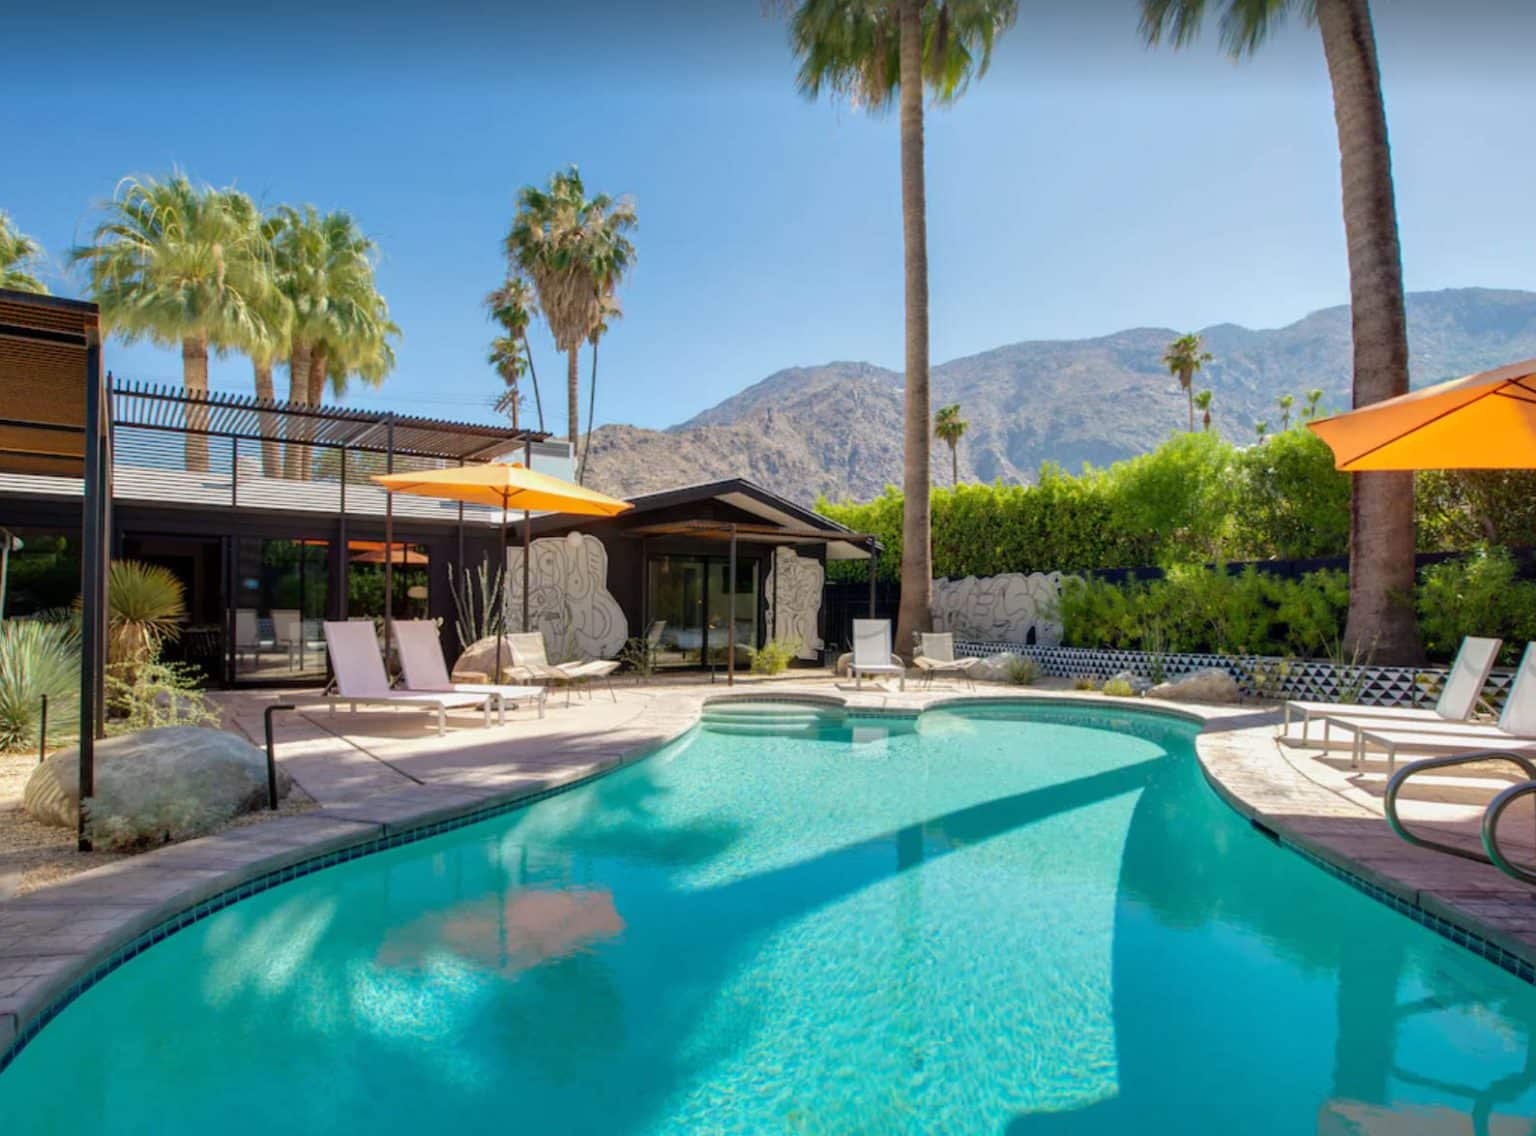 10 Stunning VRBO Palm Springs Rentals with a Pool